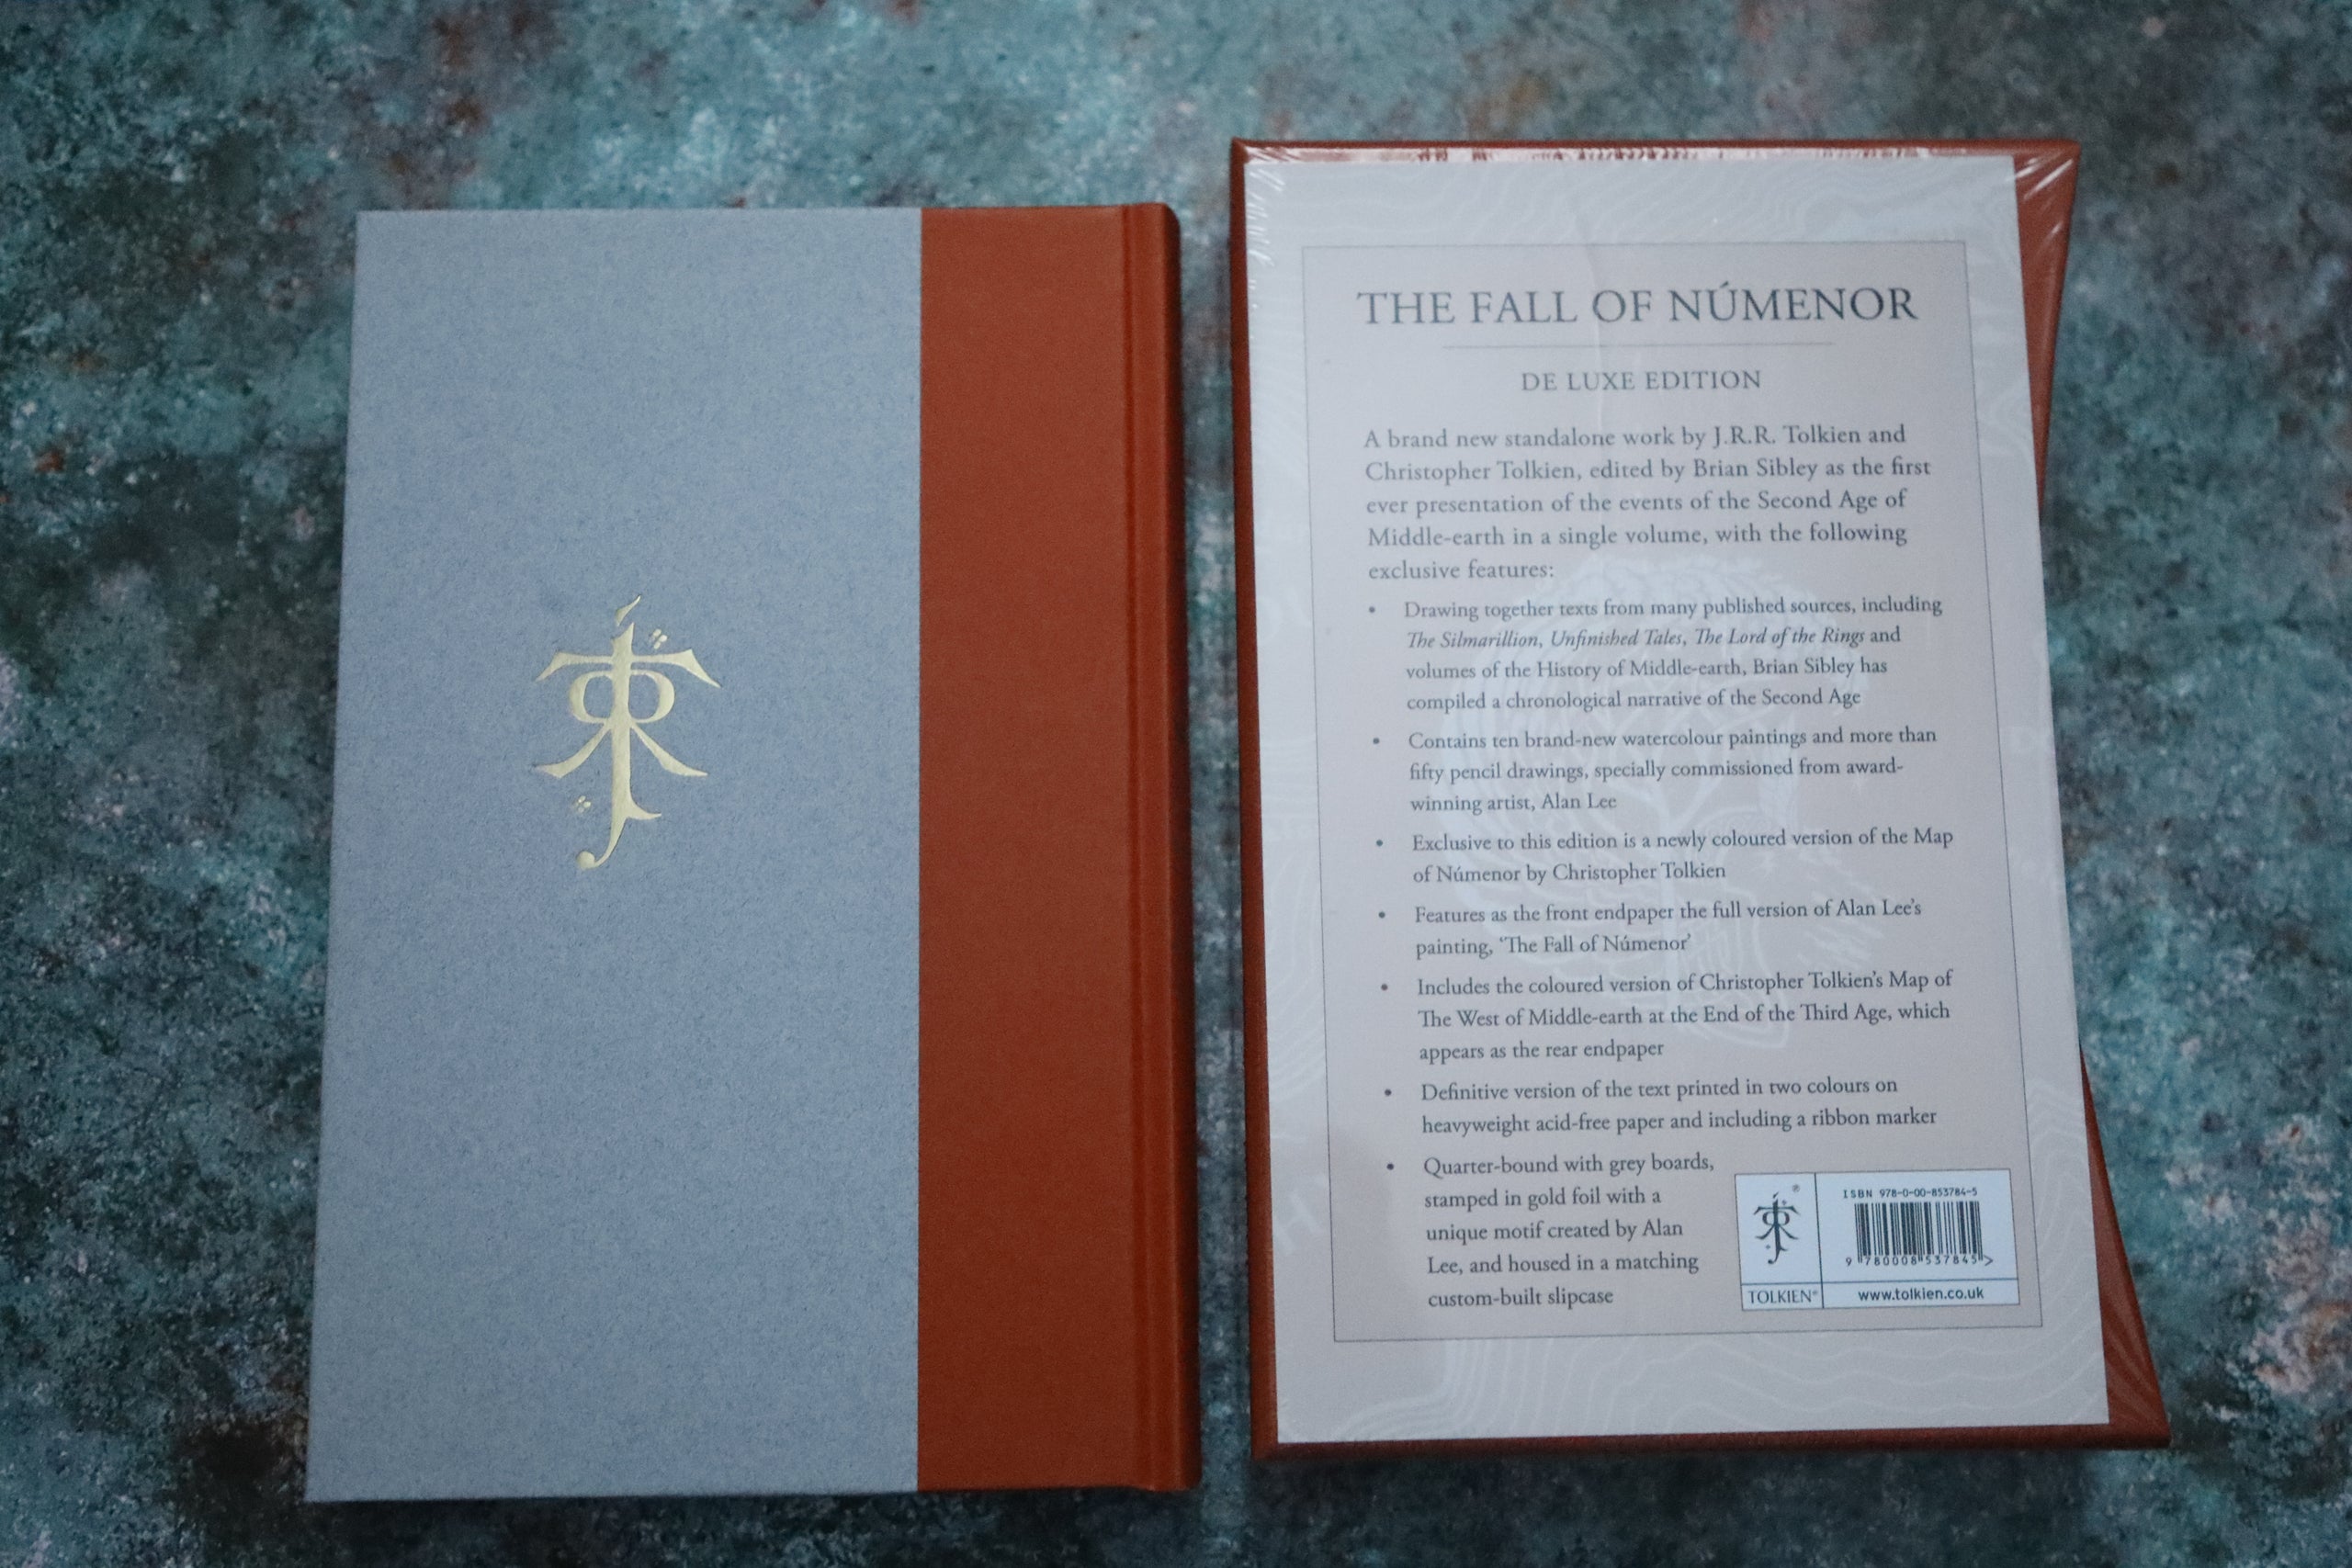 jrr-tolkien-the-fall-of-numenor-deluxe-signed-by-alan-lee-and-dated-first-edition